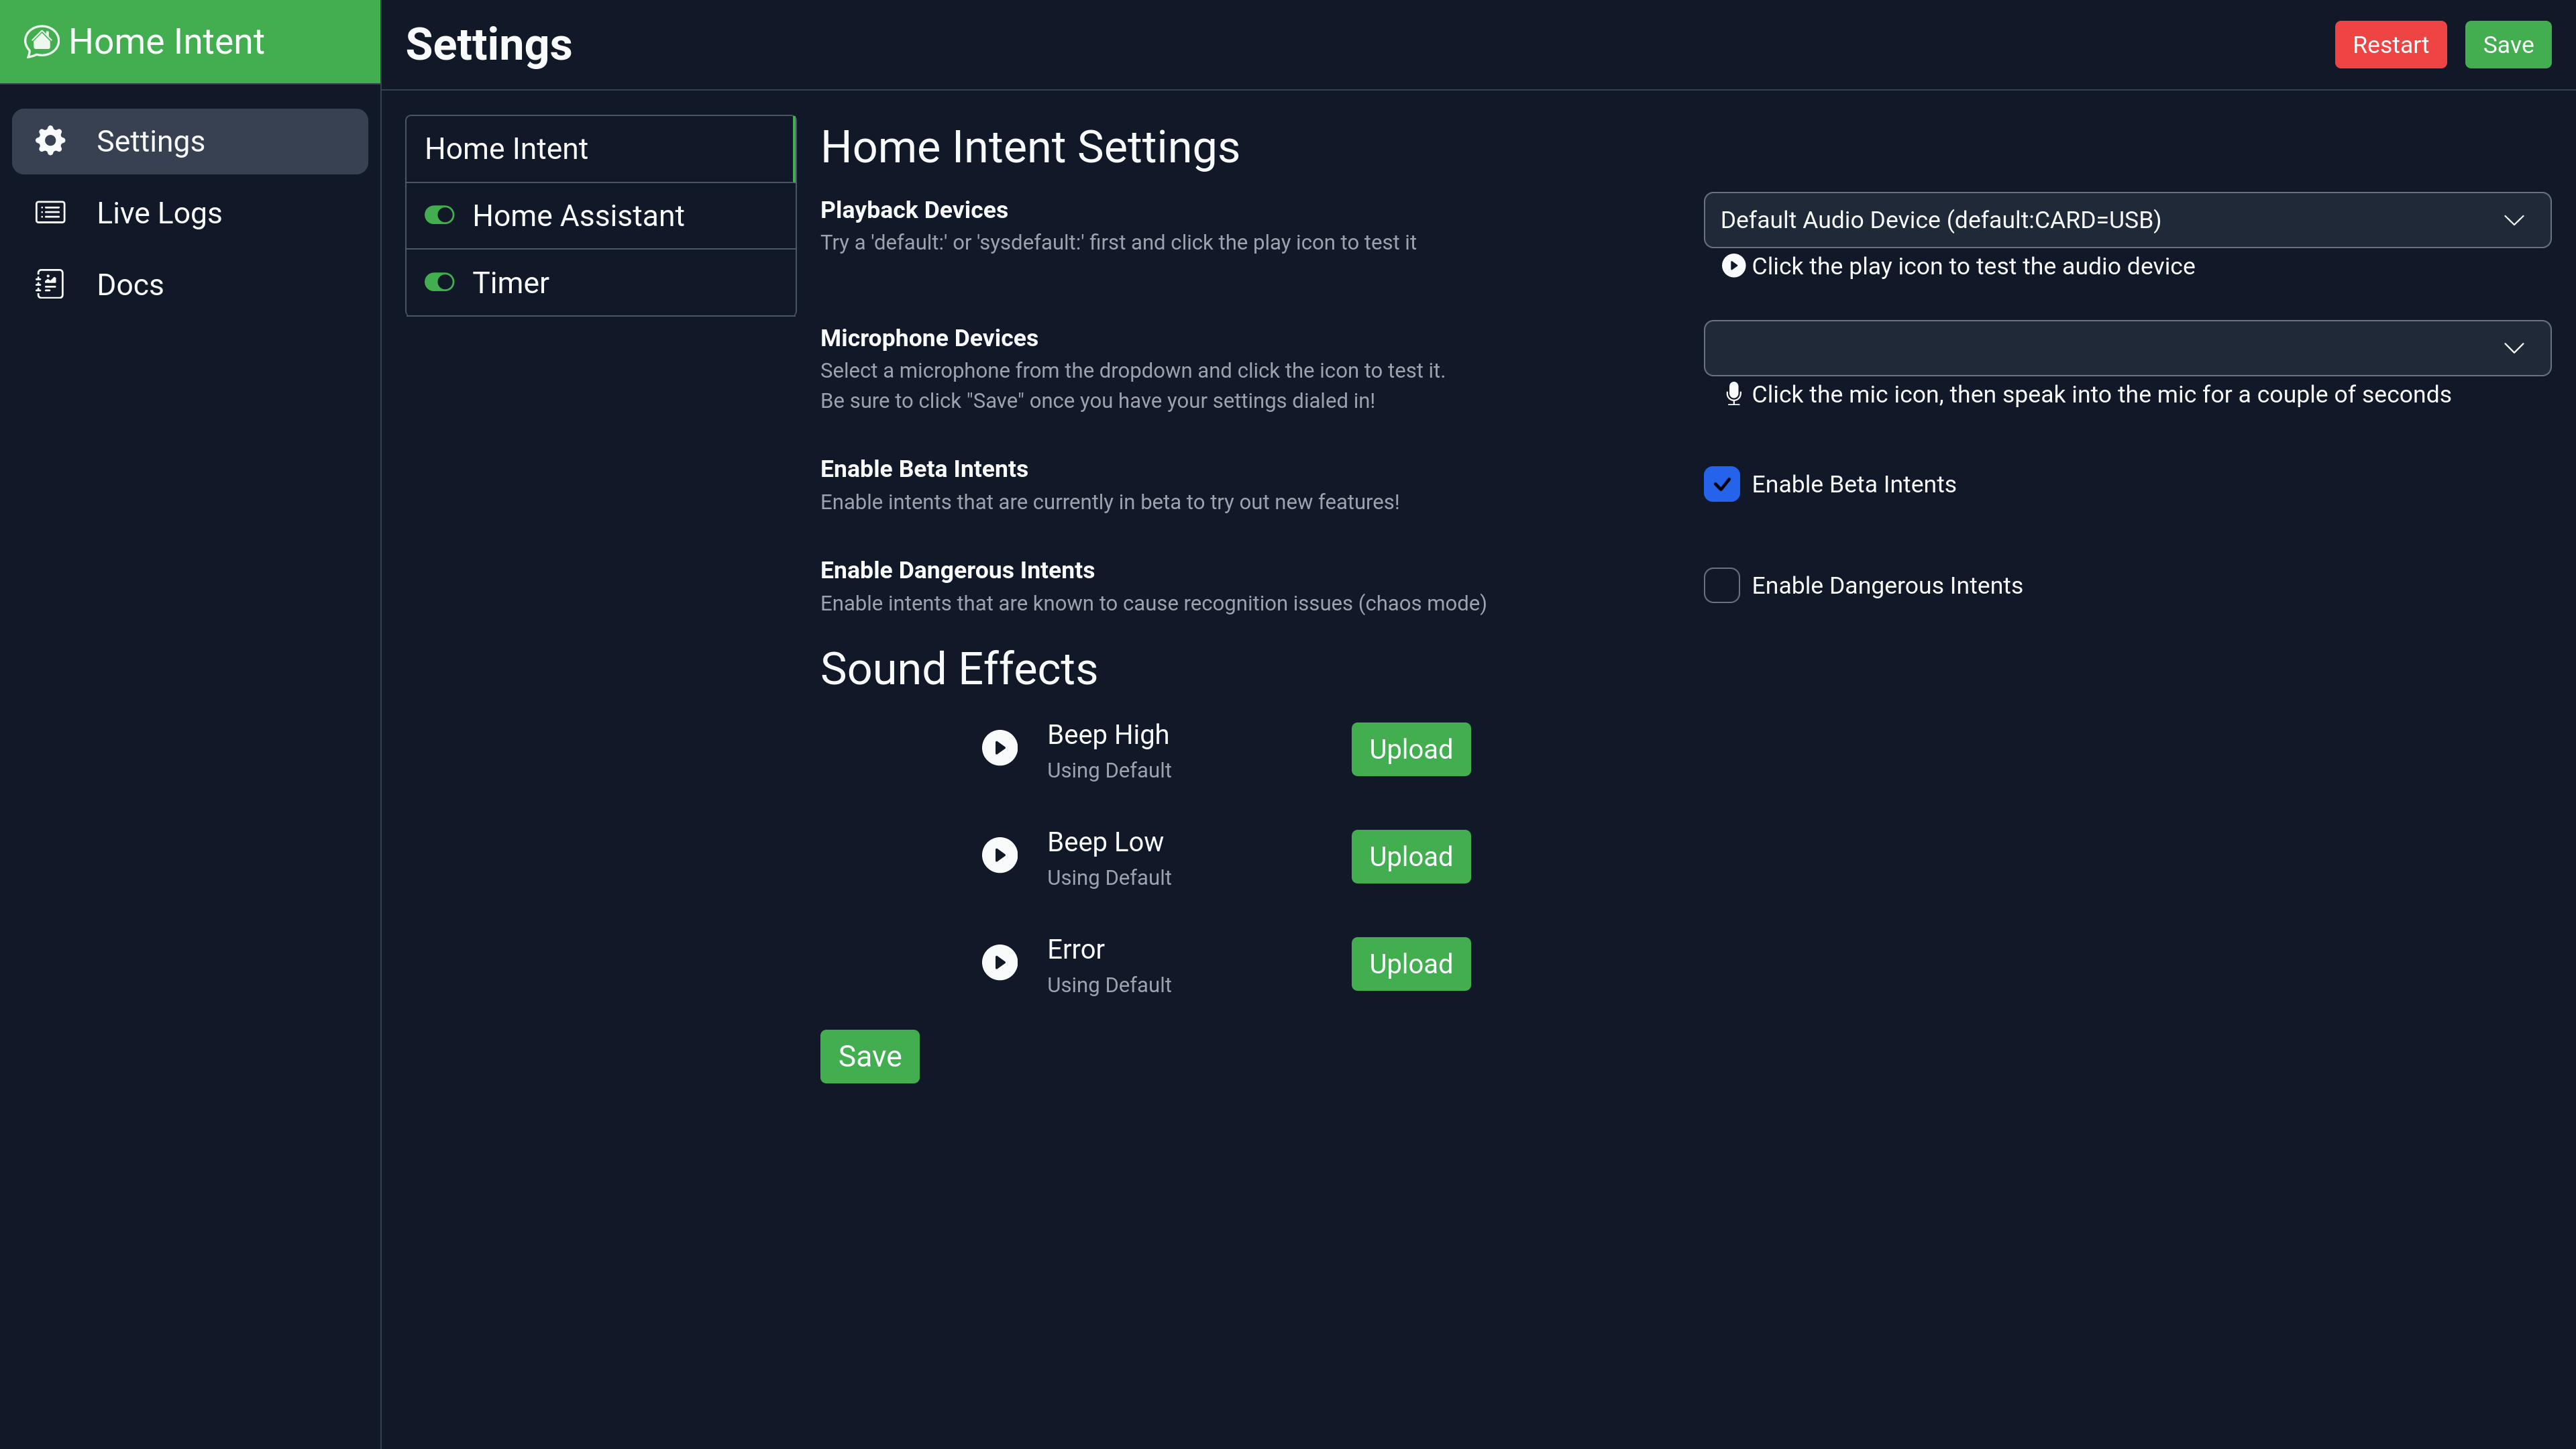 Home Intent Settings filled out